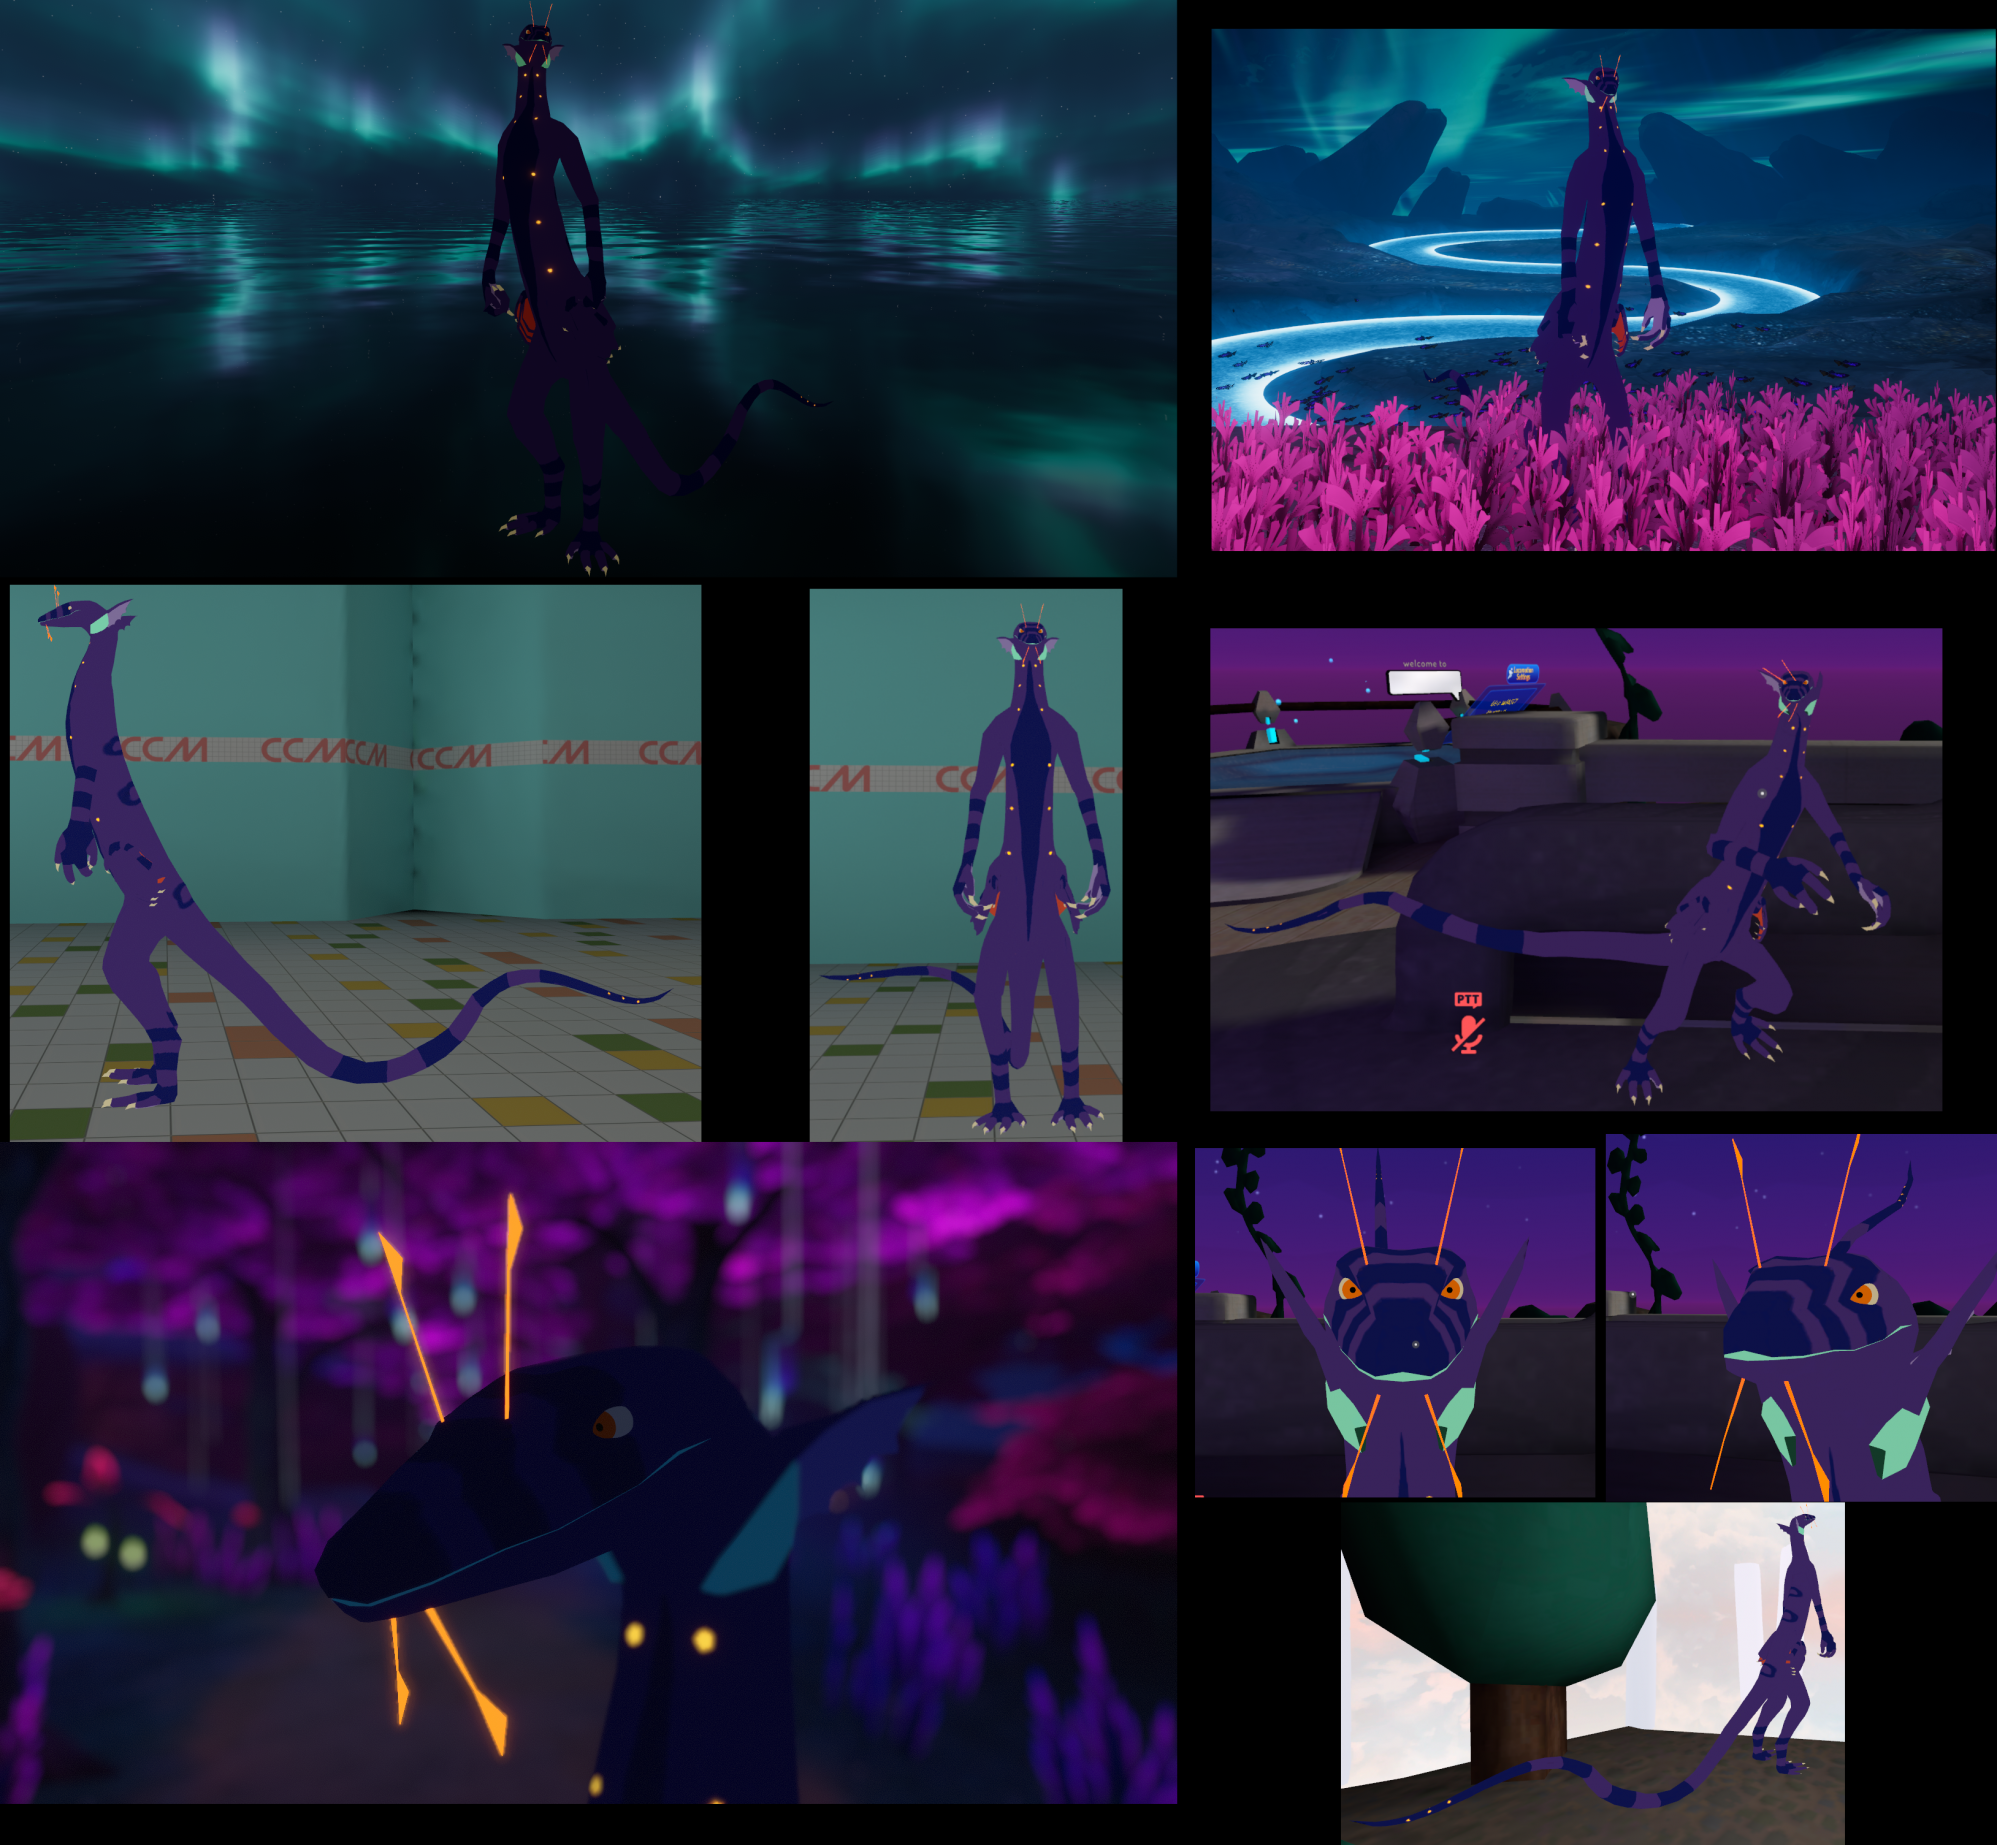 Compilation of VRChat screenshots showing the purple alien in action.